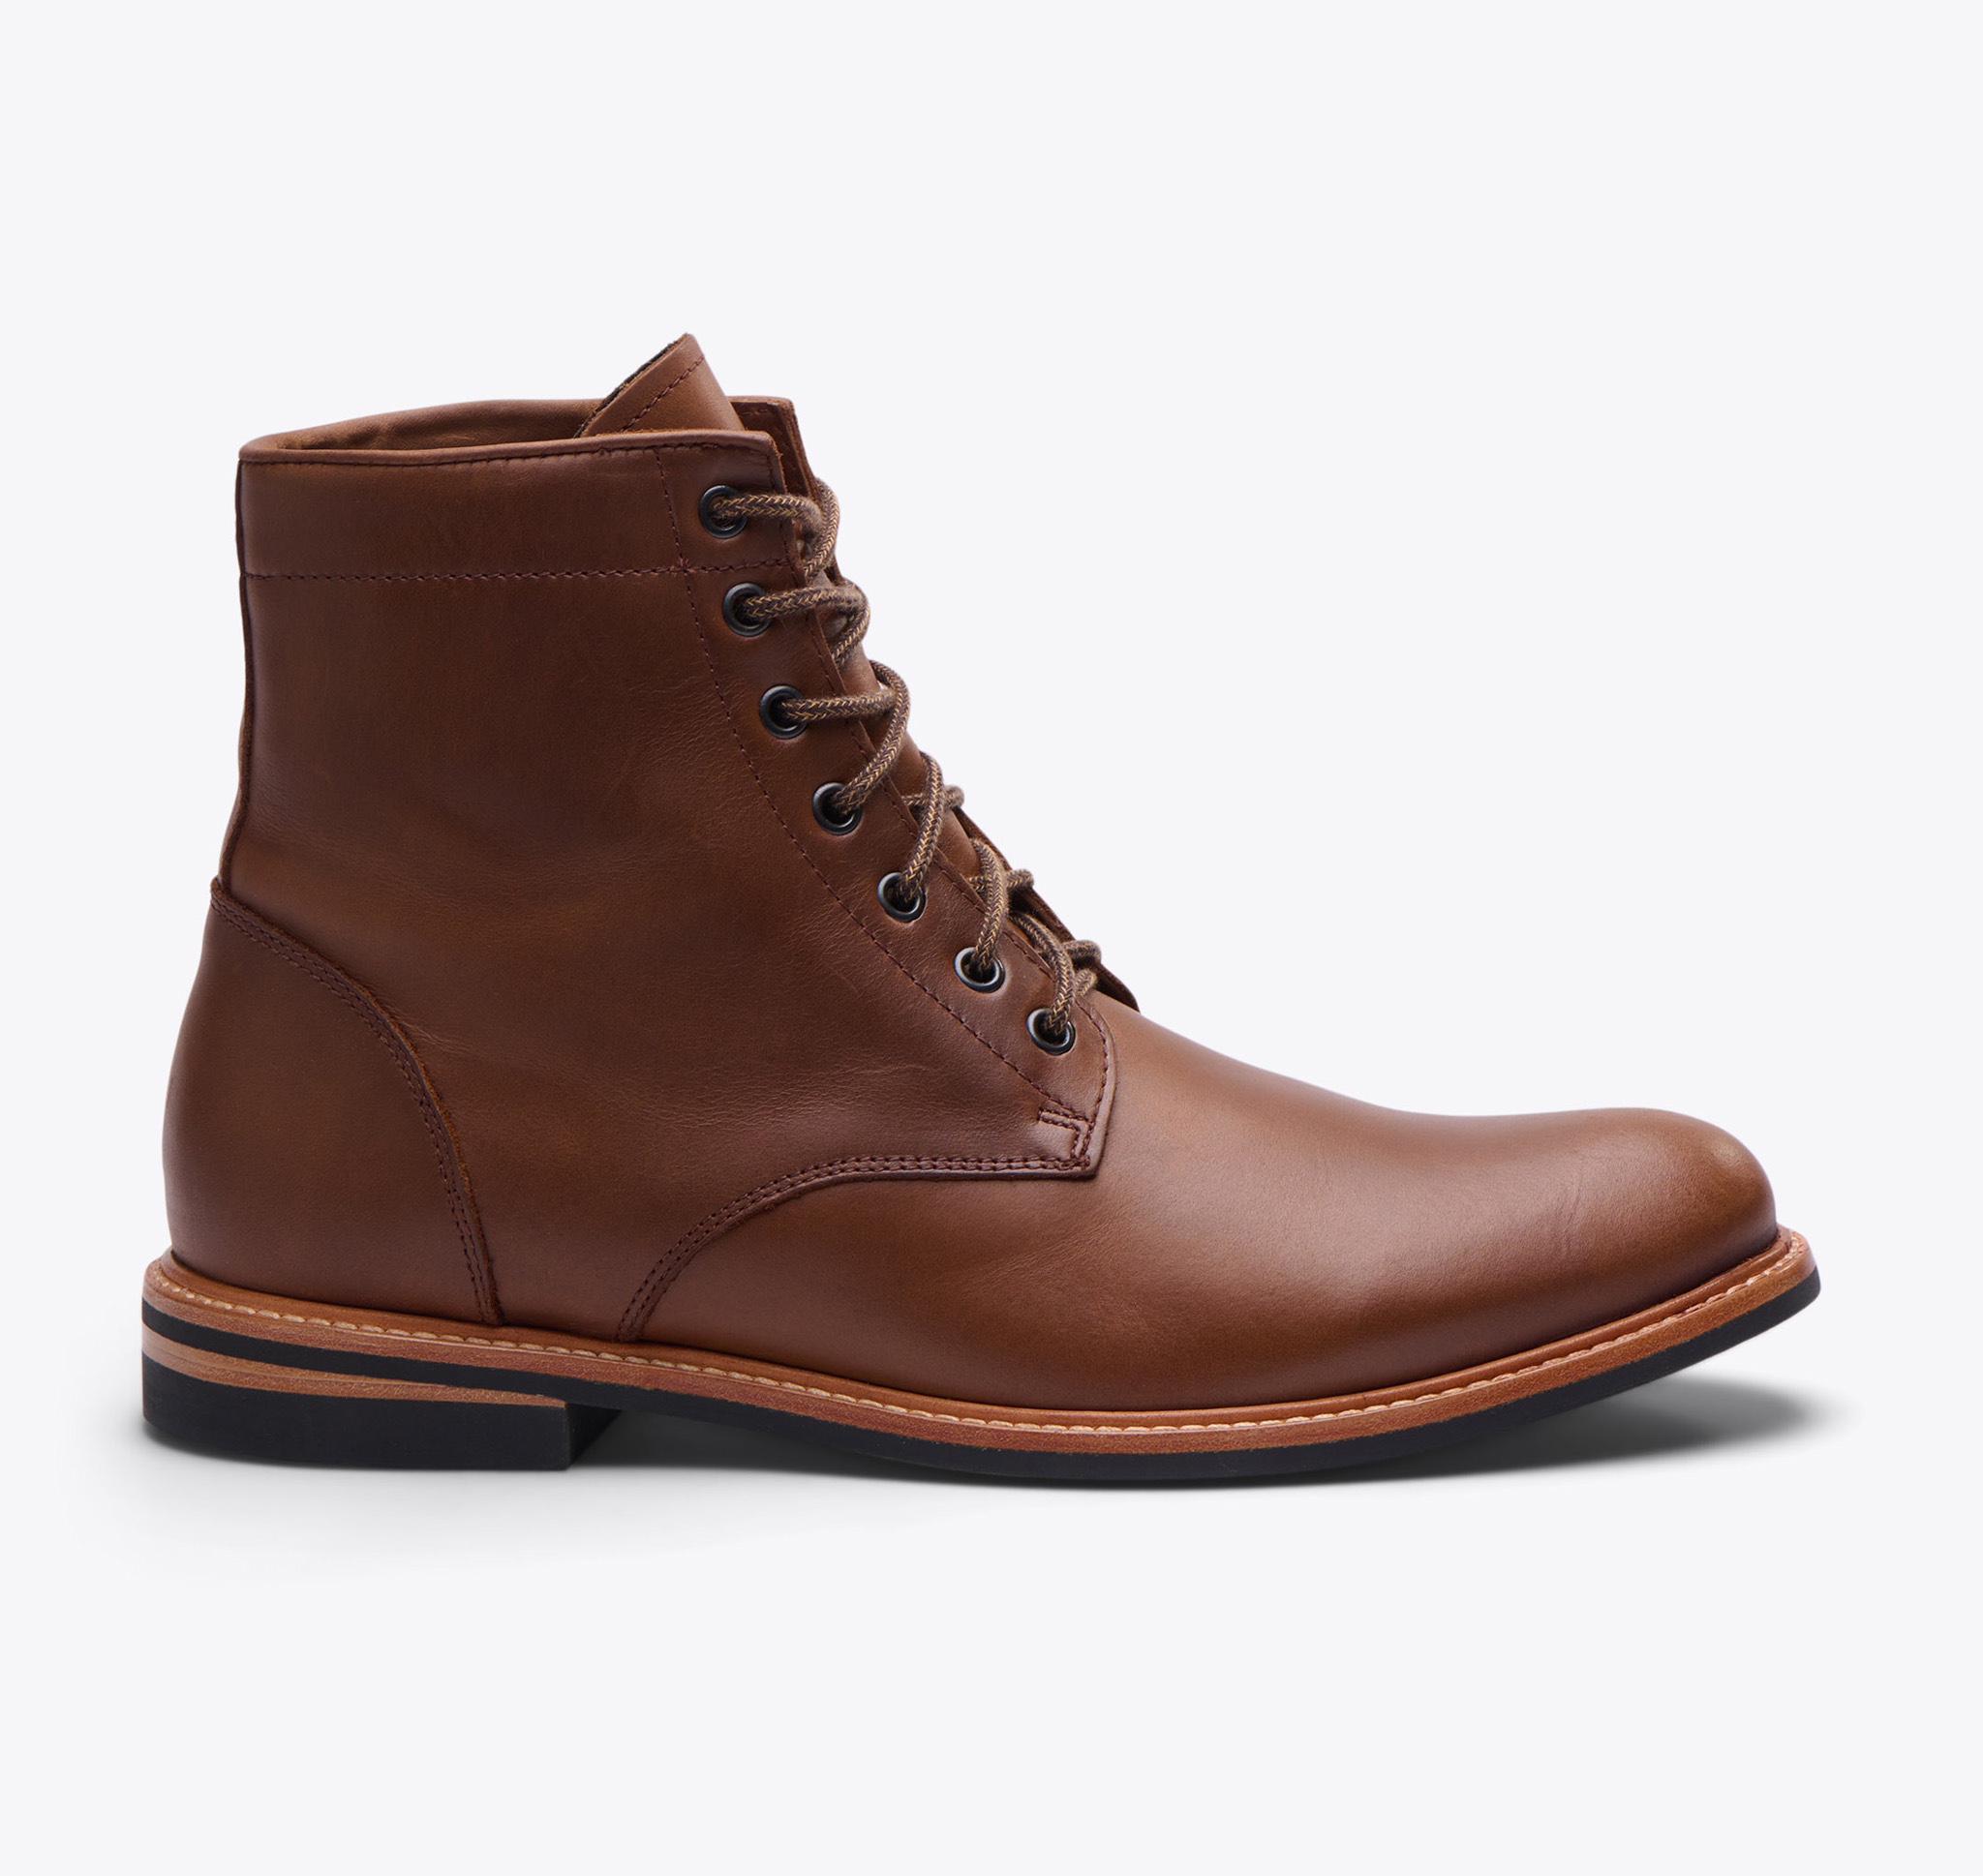 Nisolo All-Weather Andres Boot Brown - Every Nisolo product is built on the foundation of comfort, function, and design. 